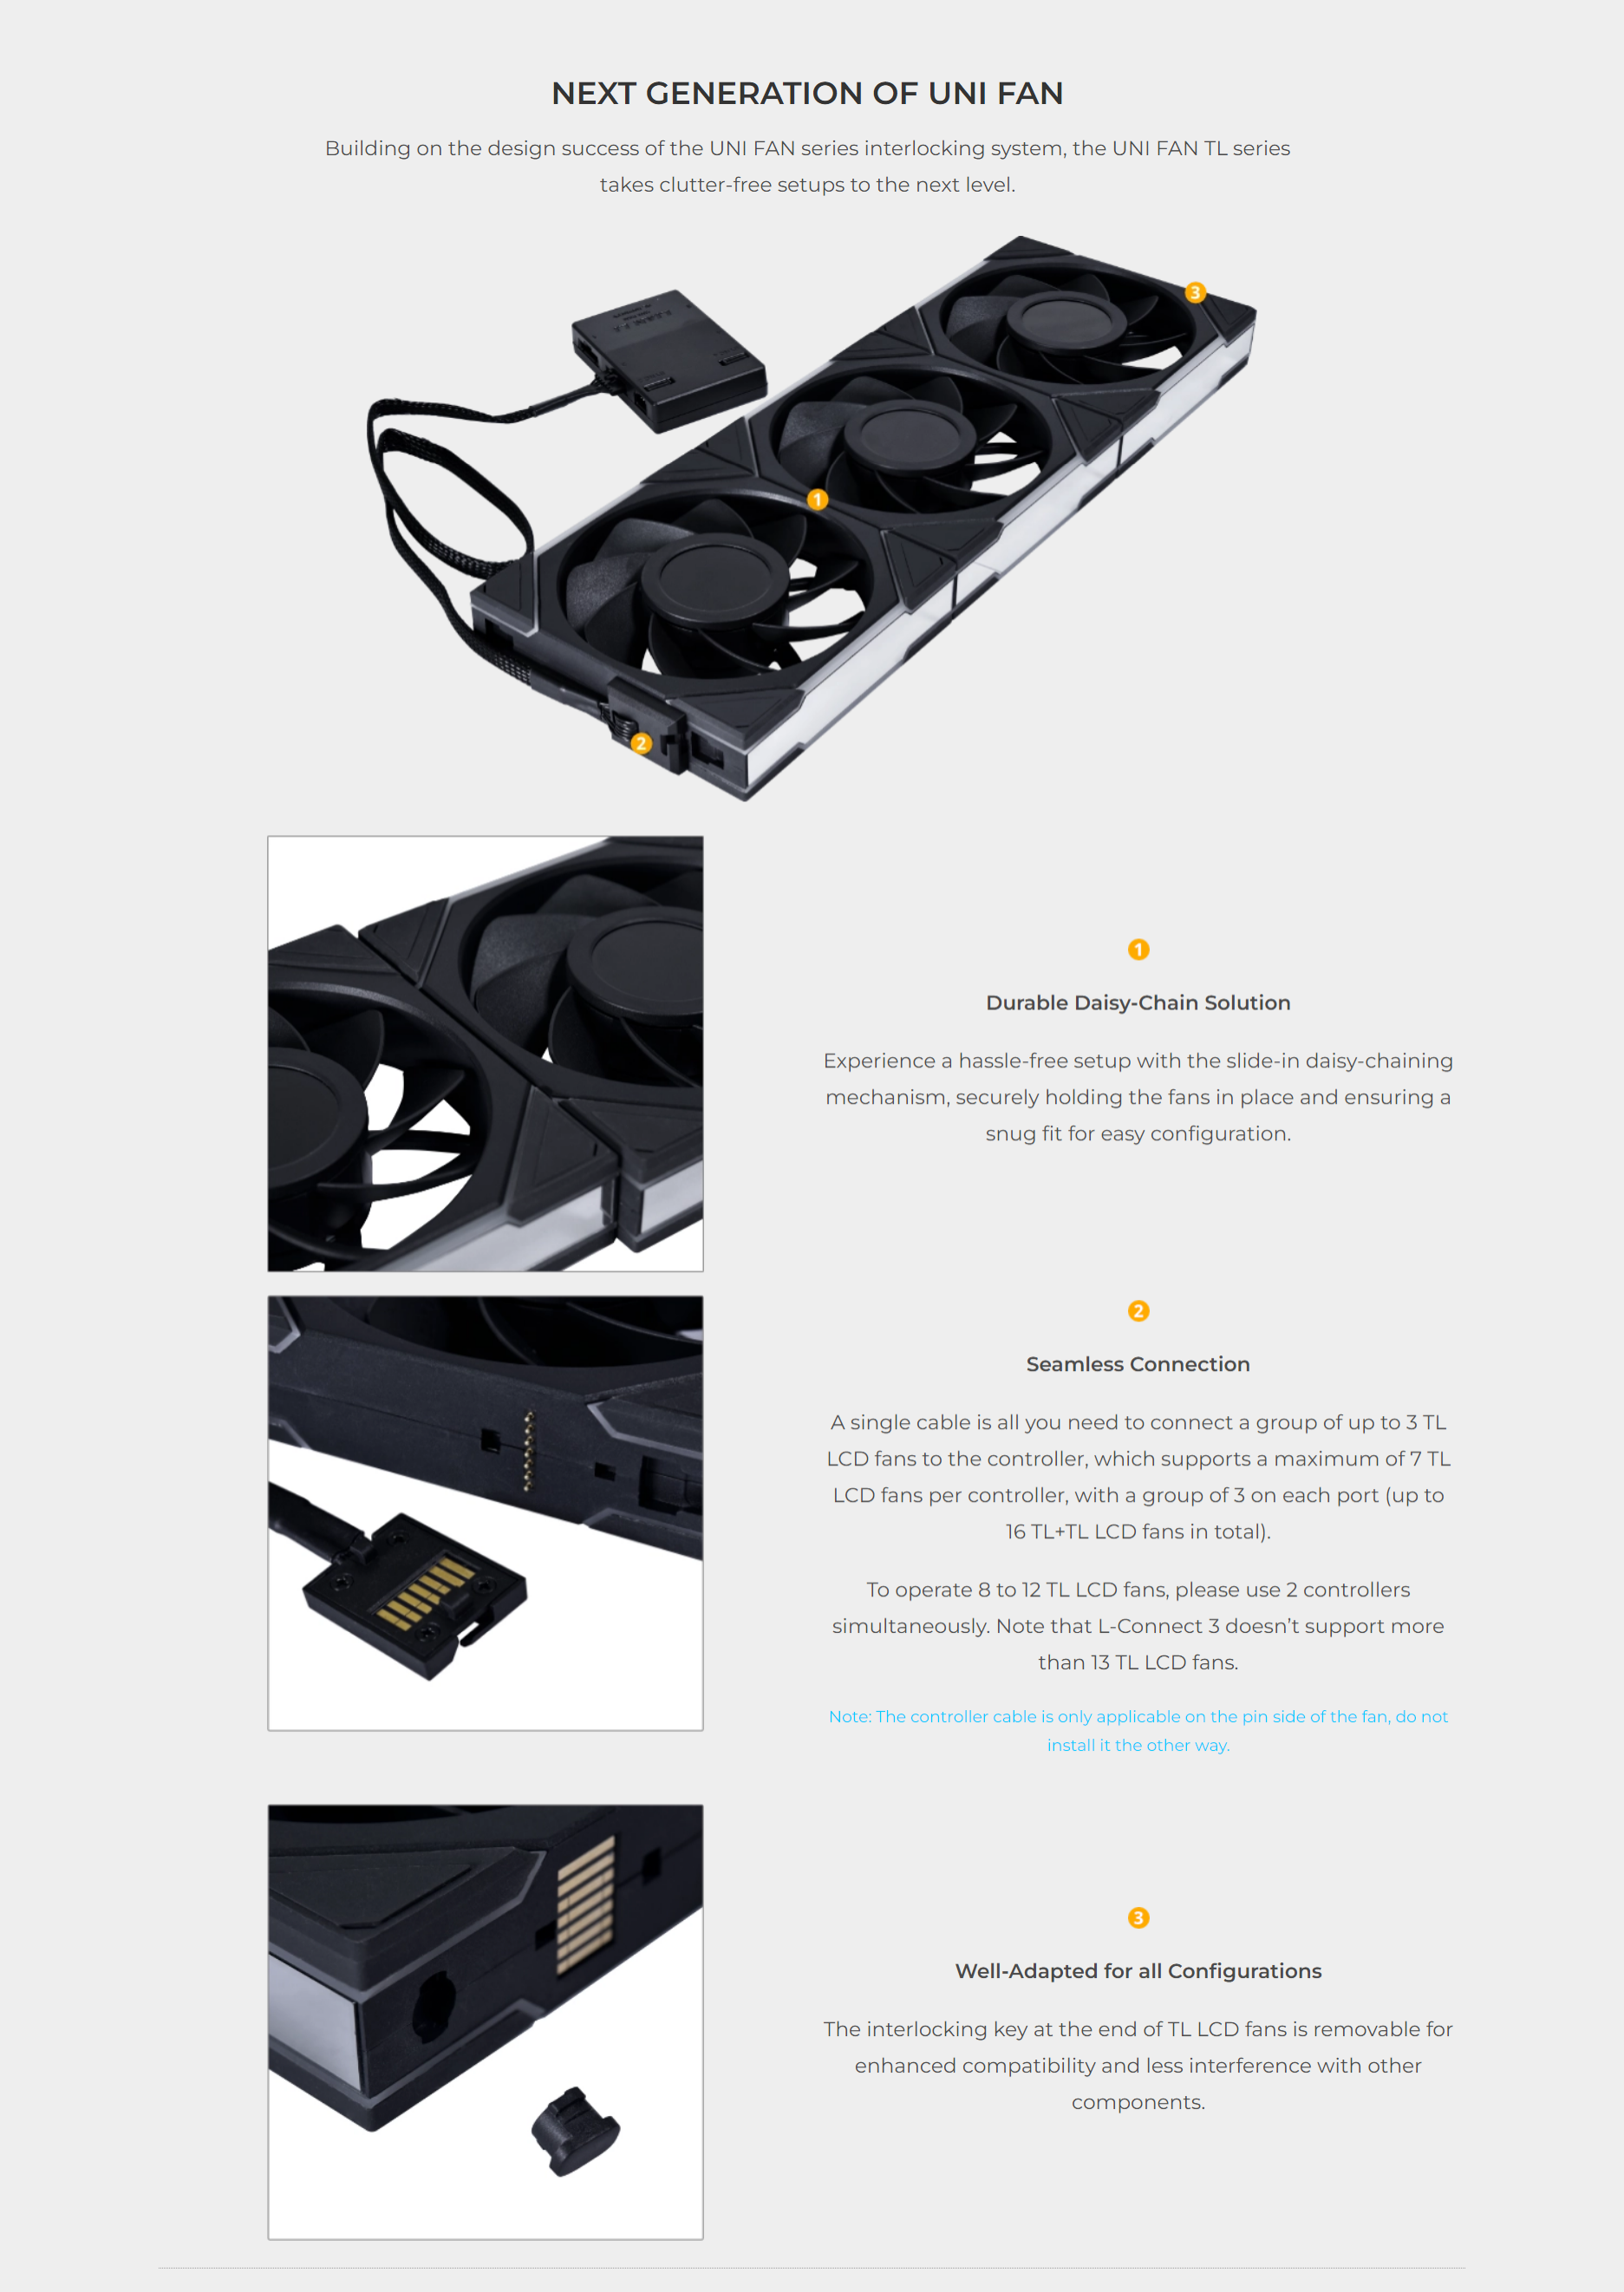 A large marketing image providing additional information about the product Lian Li UNI Fan TL LCD 140 Reverse Blade 140mm Fan Single Pack - Black  - Additional alt info not provided